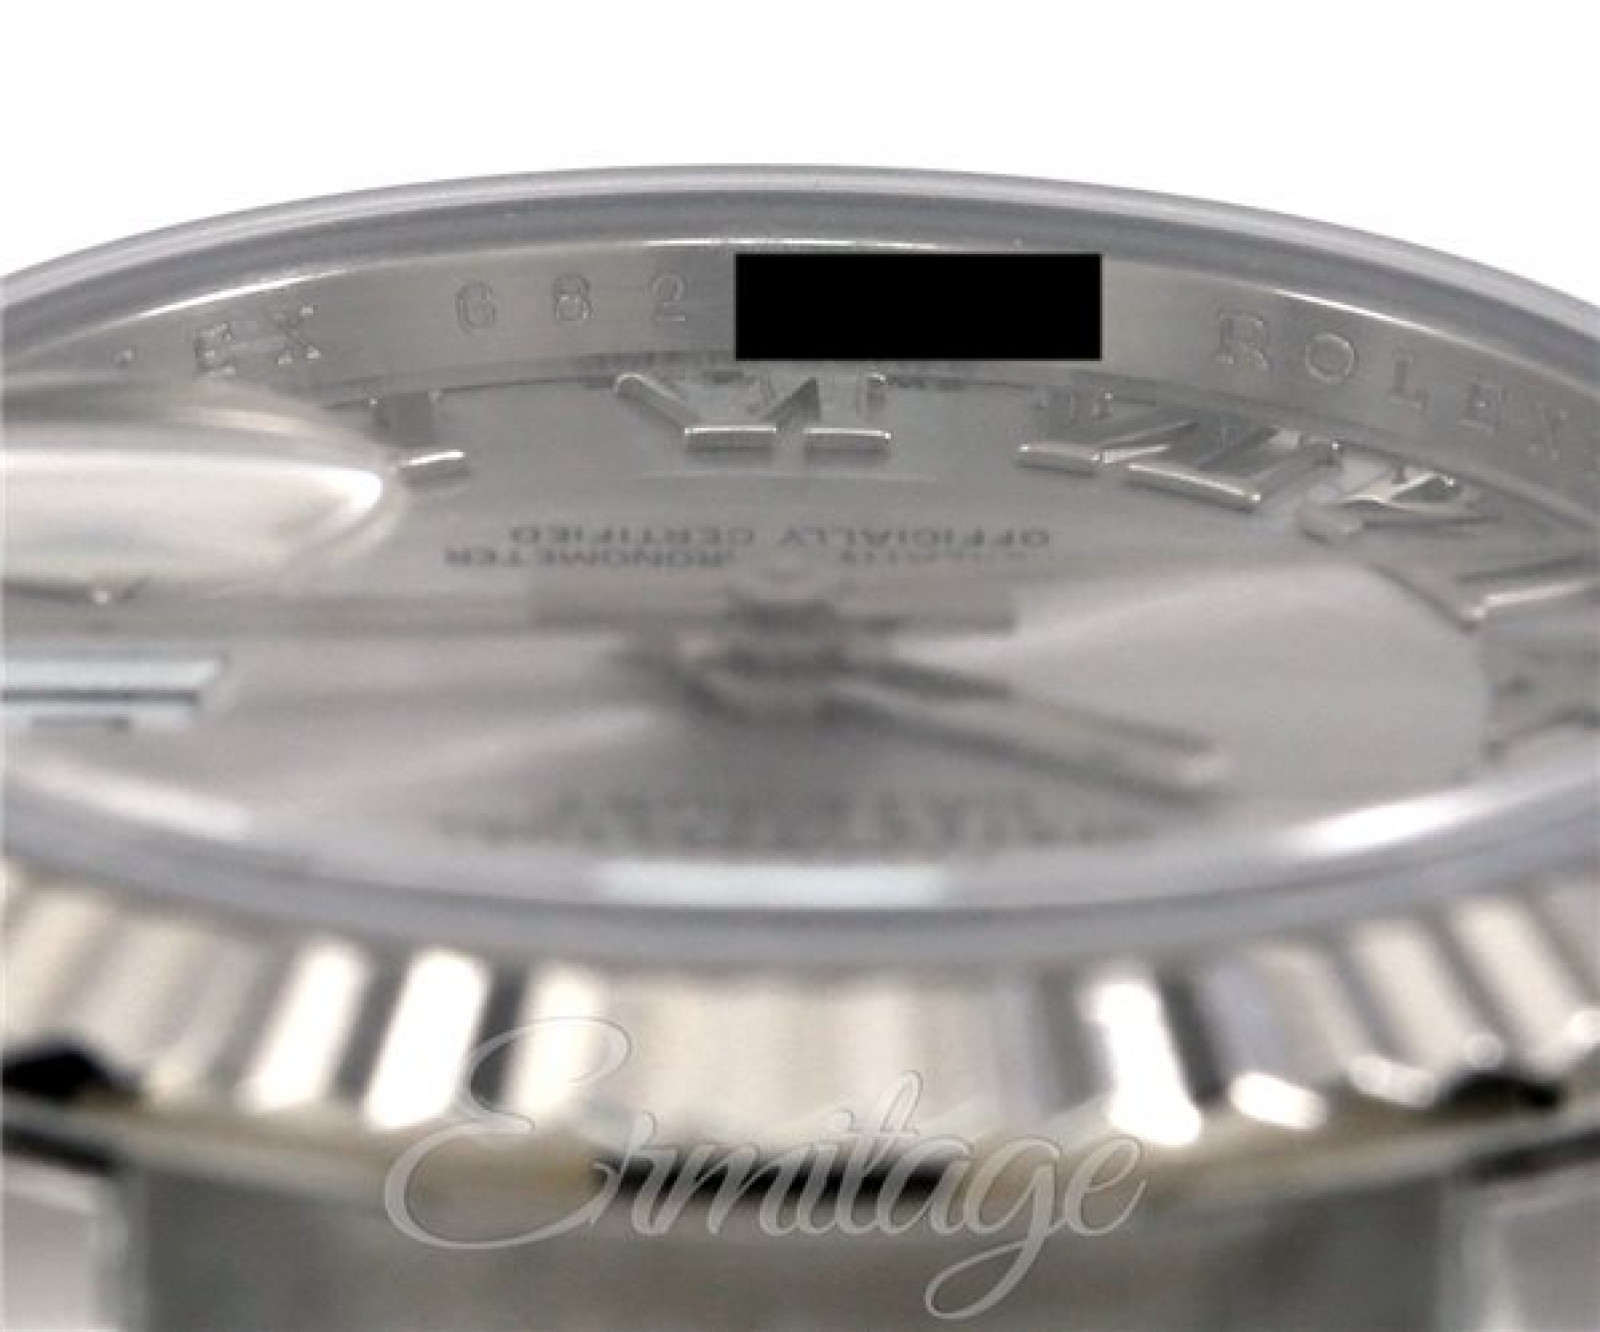 Rolex Datejust 179174 with Rhodium Dial & Roman Markers